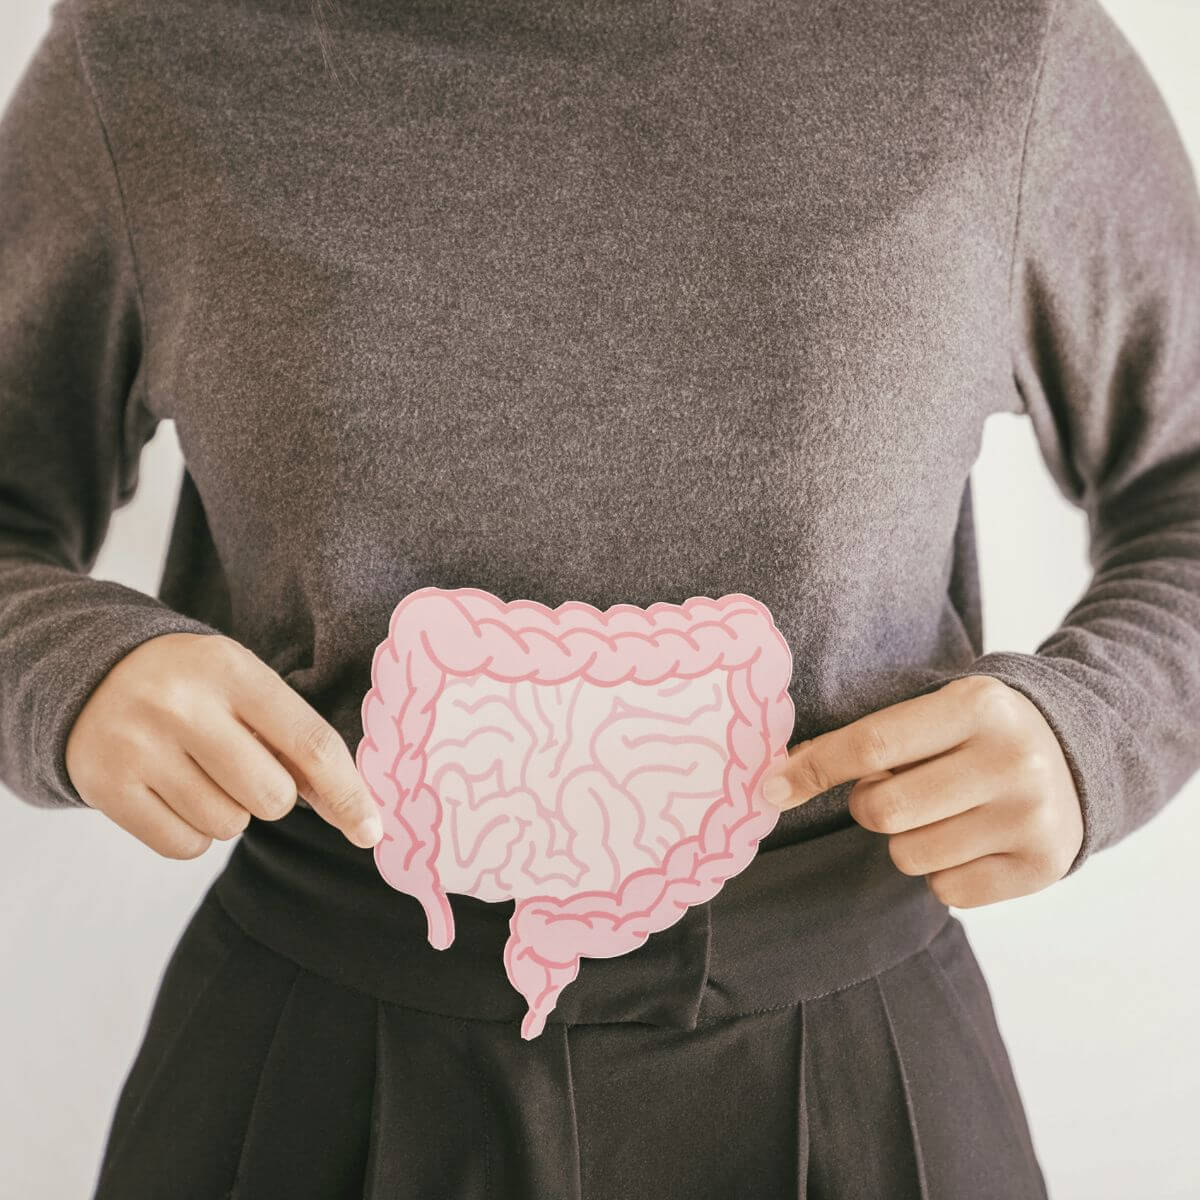 Gut-Brain Microbiome Connection: How To Feed Your Brain